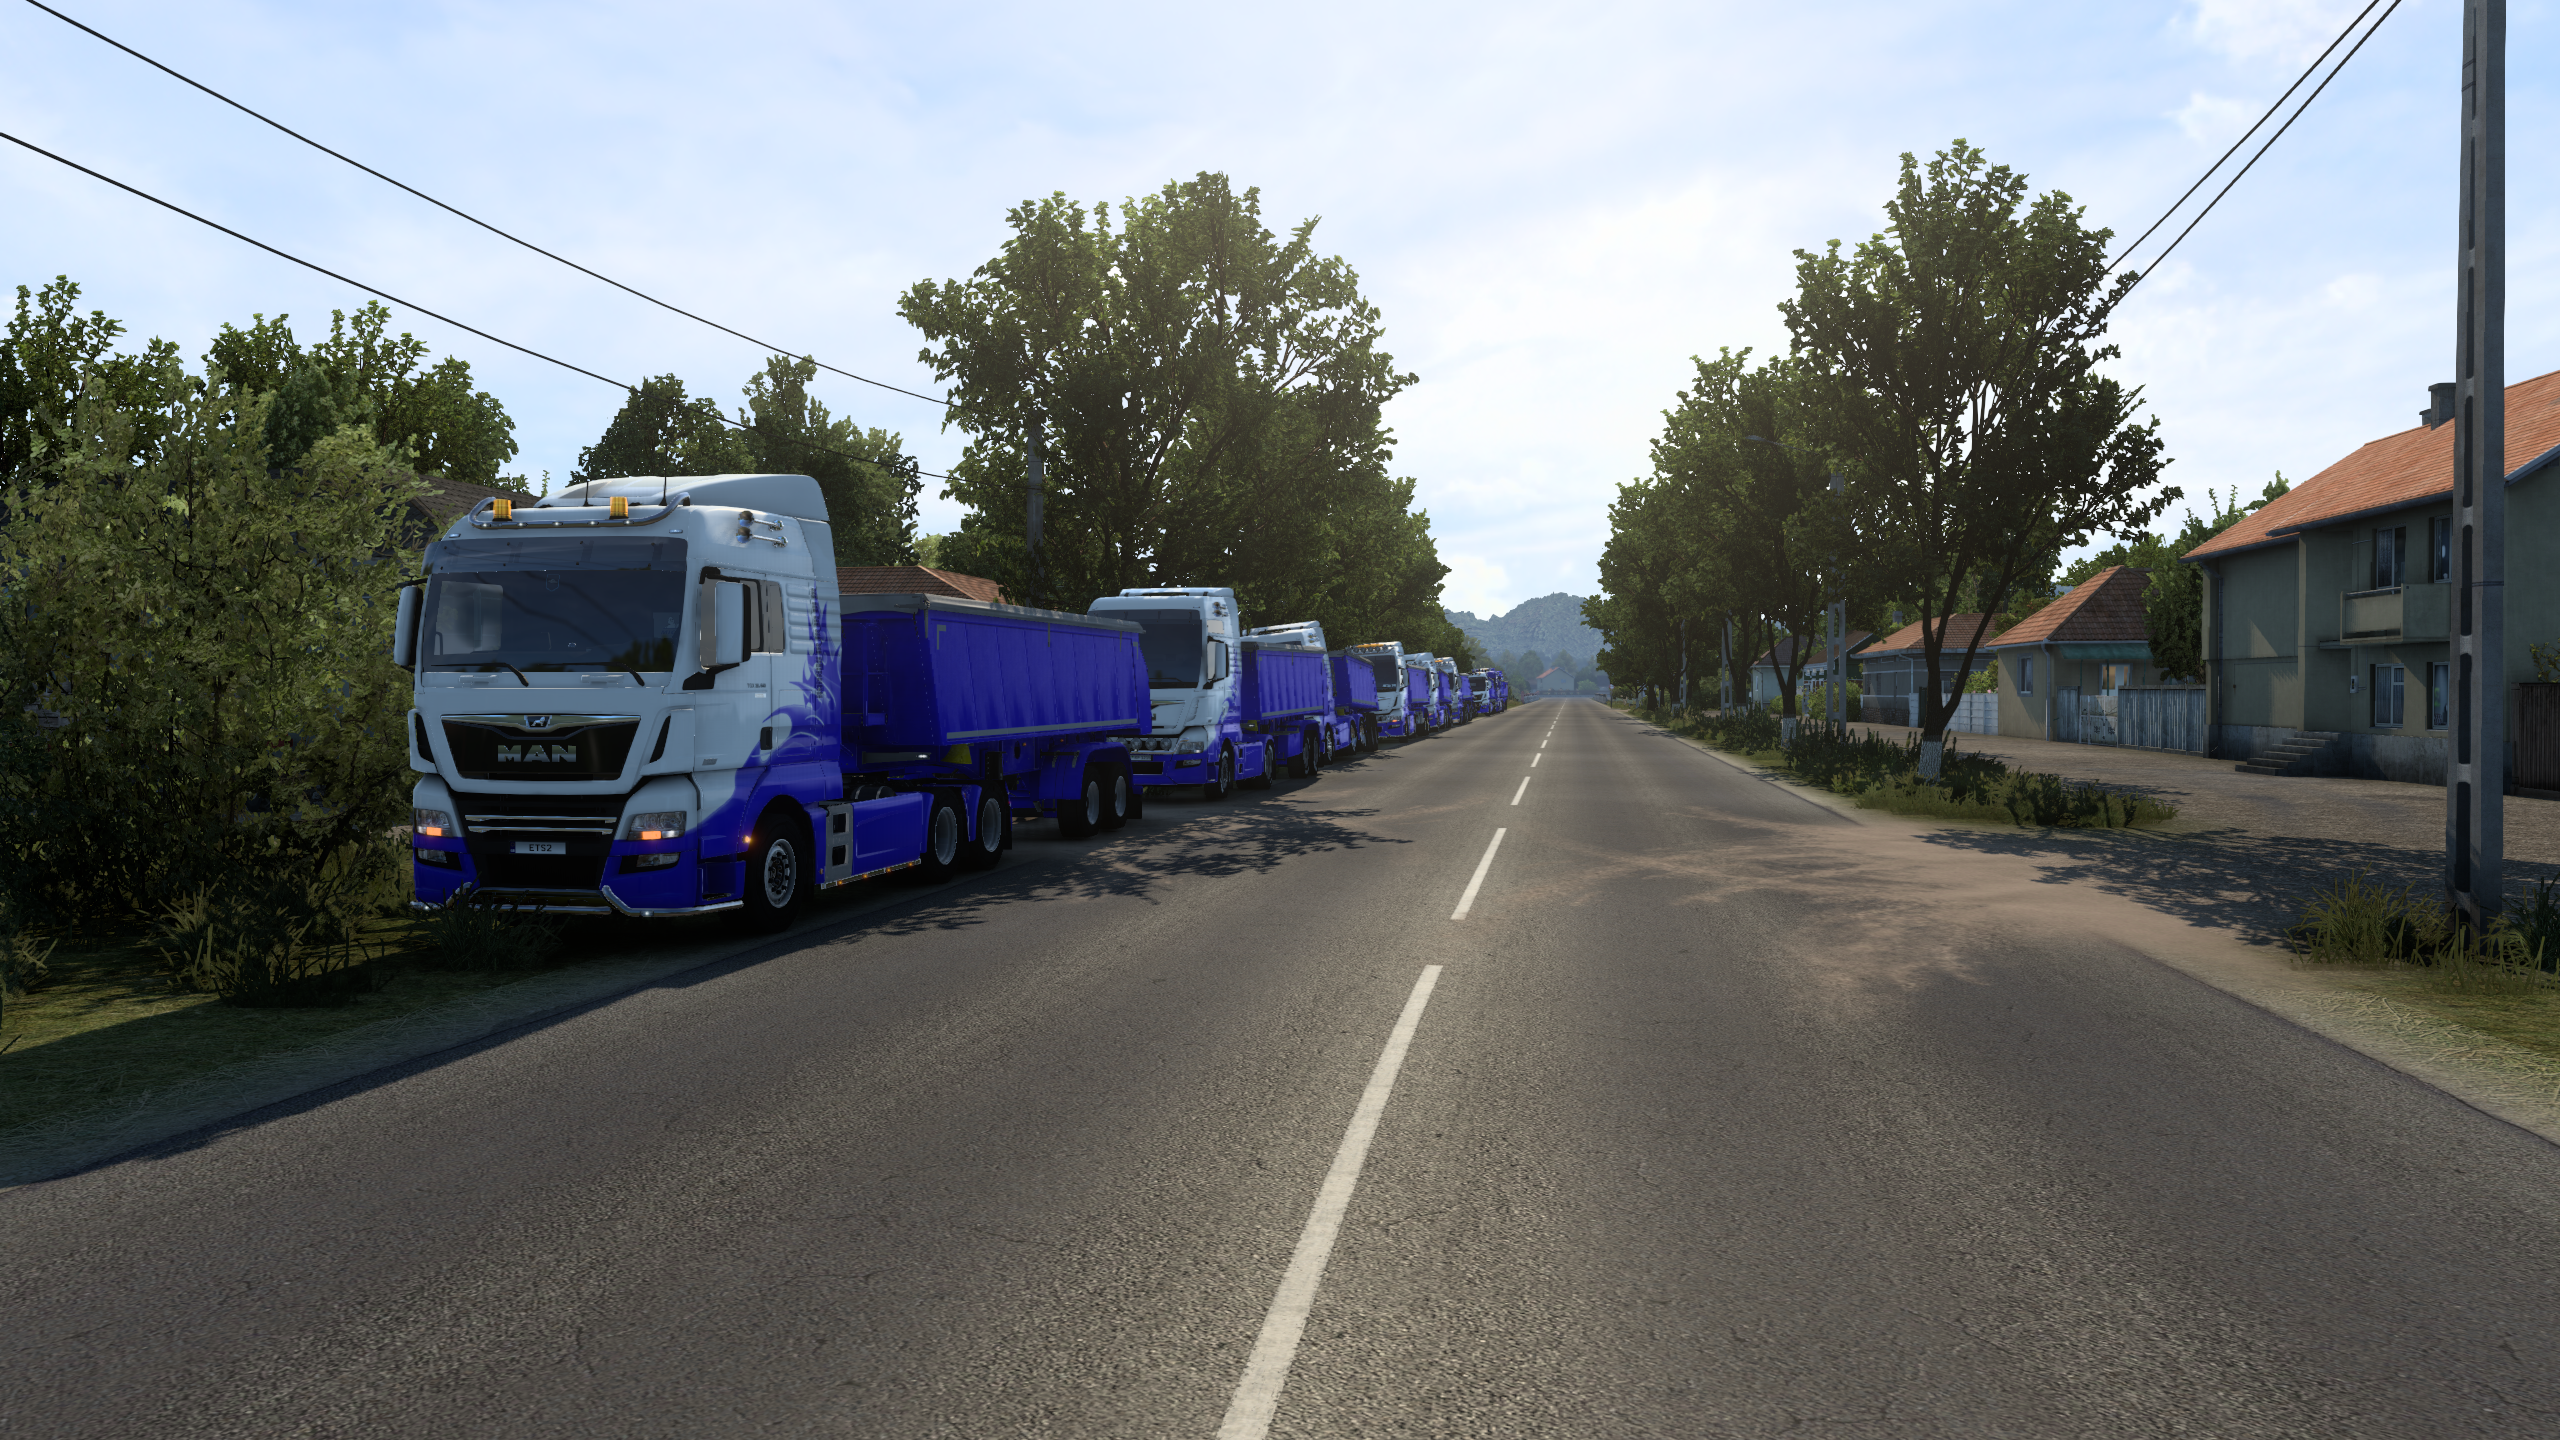 ets2_20211217_232730_00.png